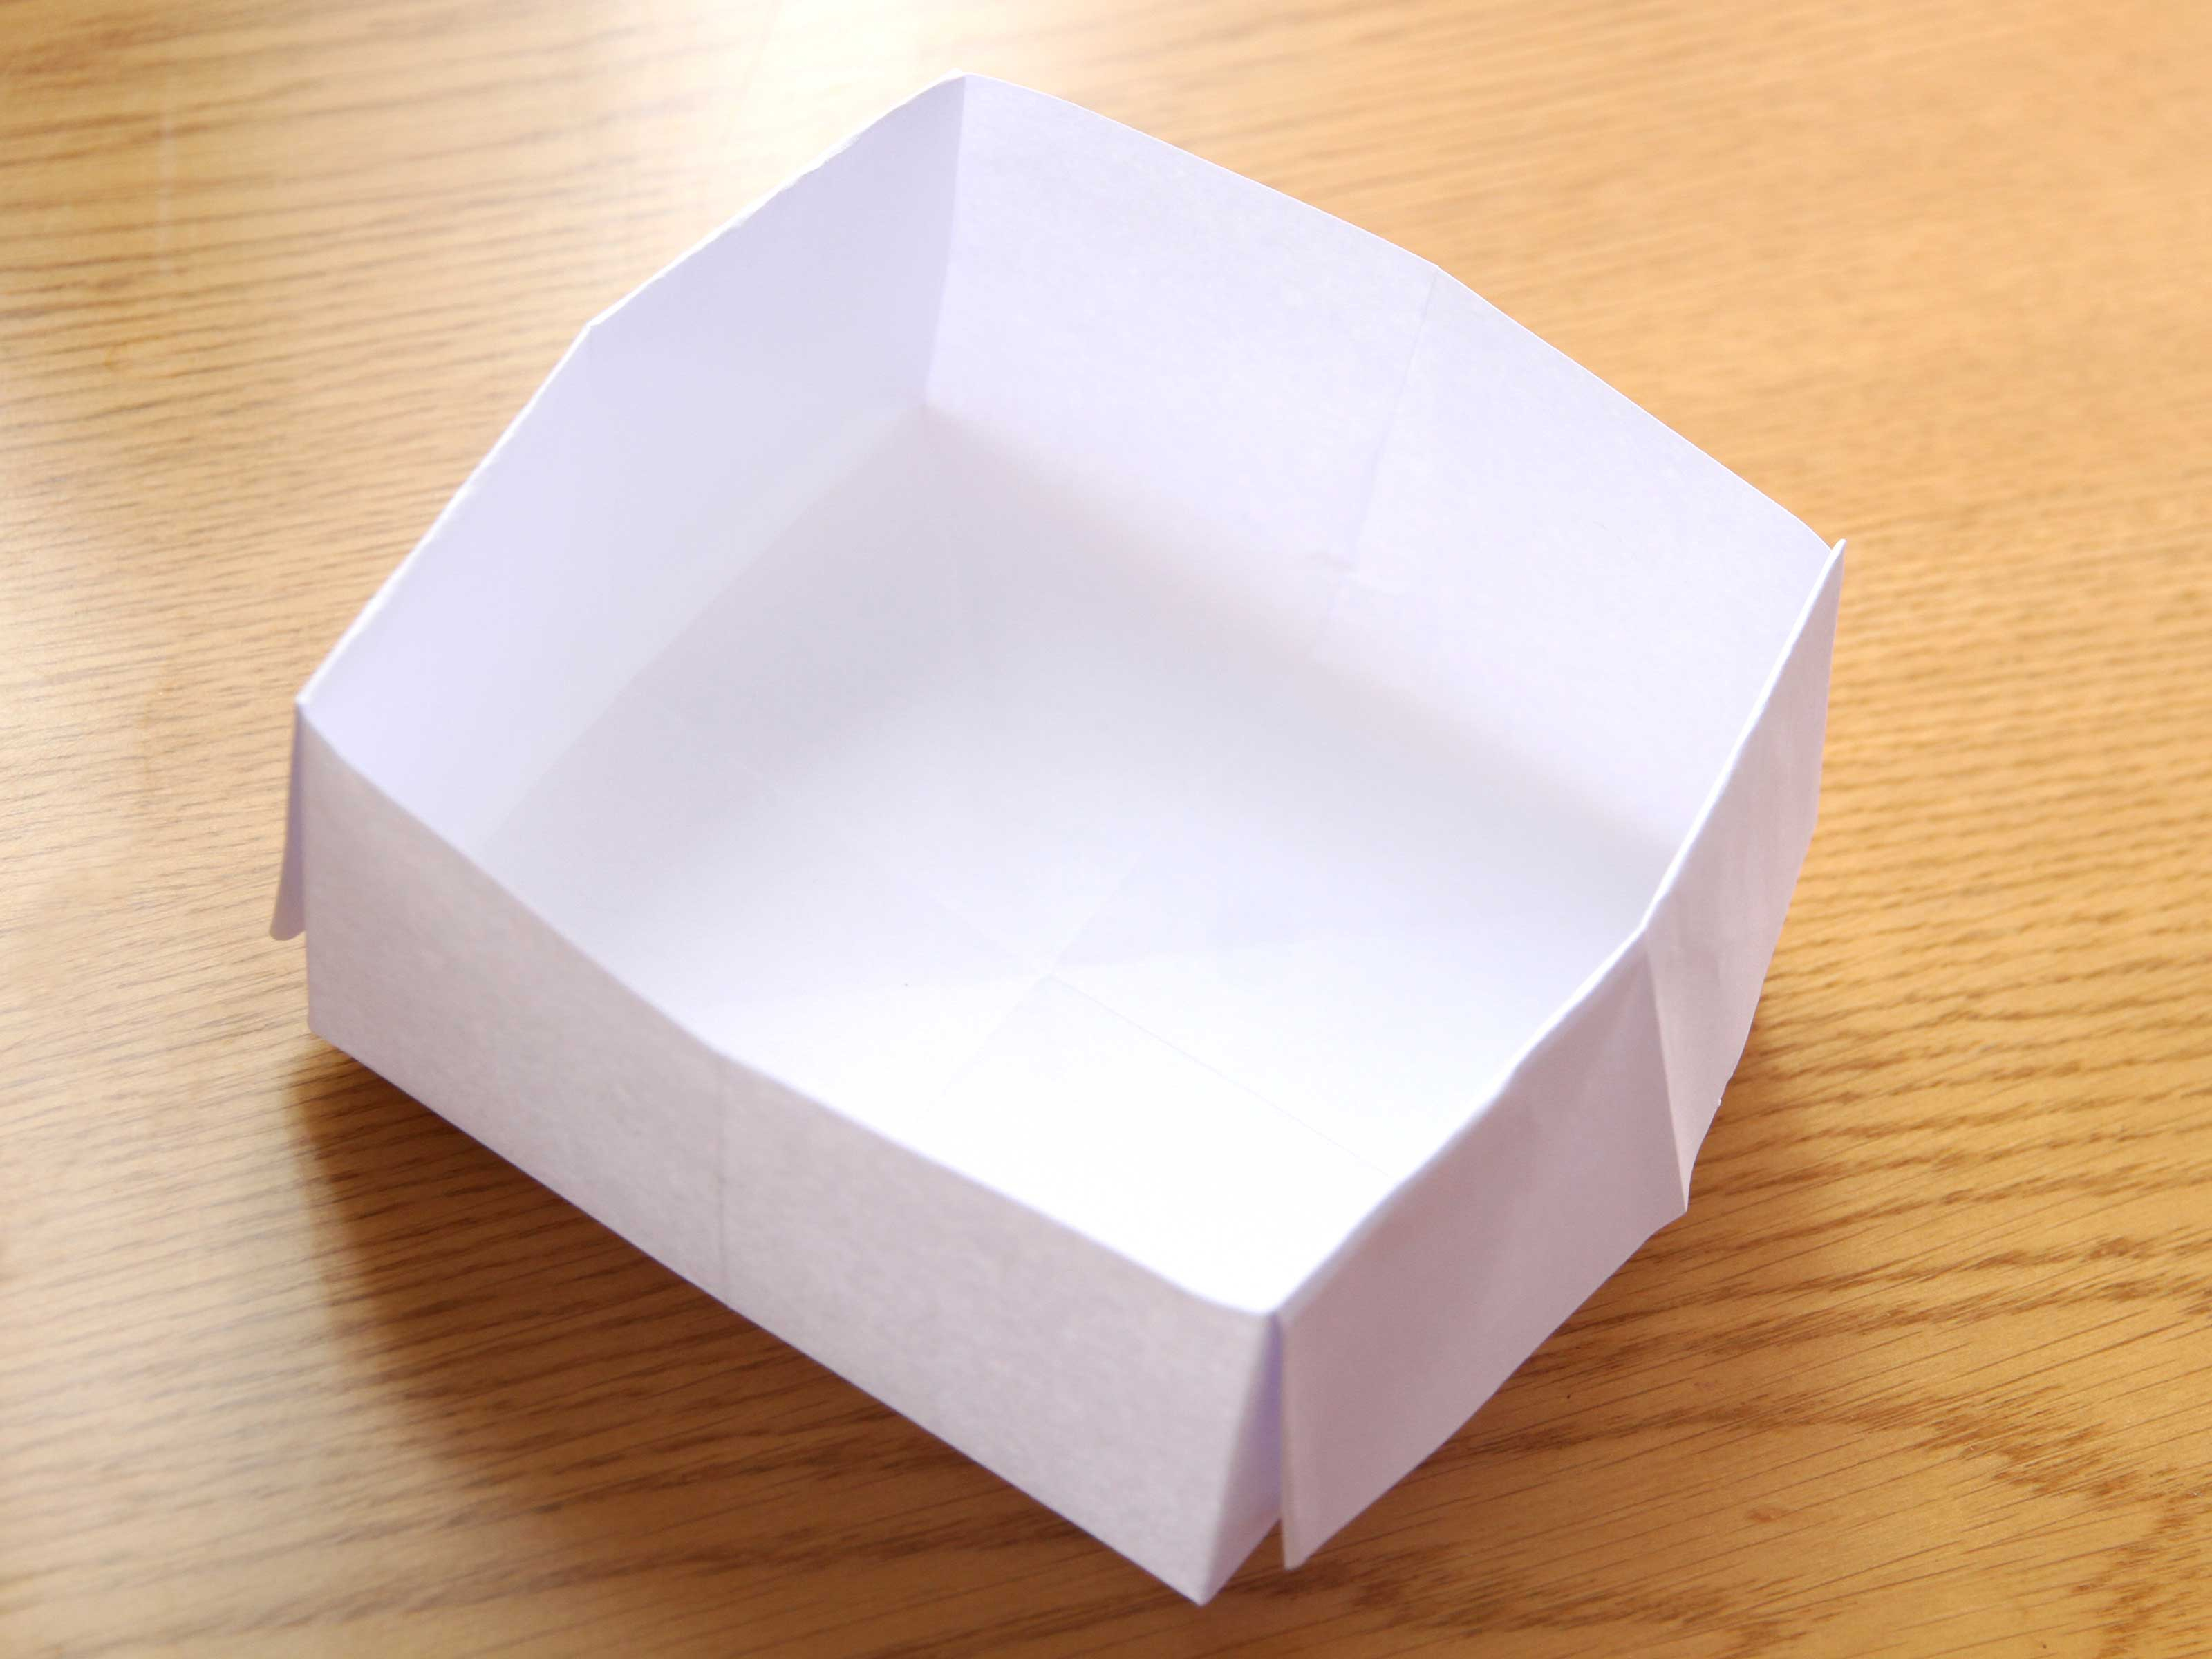 How To Make A Origami Paper Box How To Make An Origami Box With Printer Paper 12 Steps